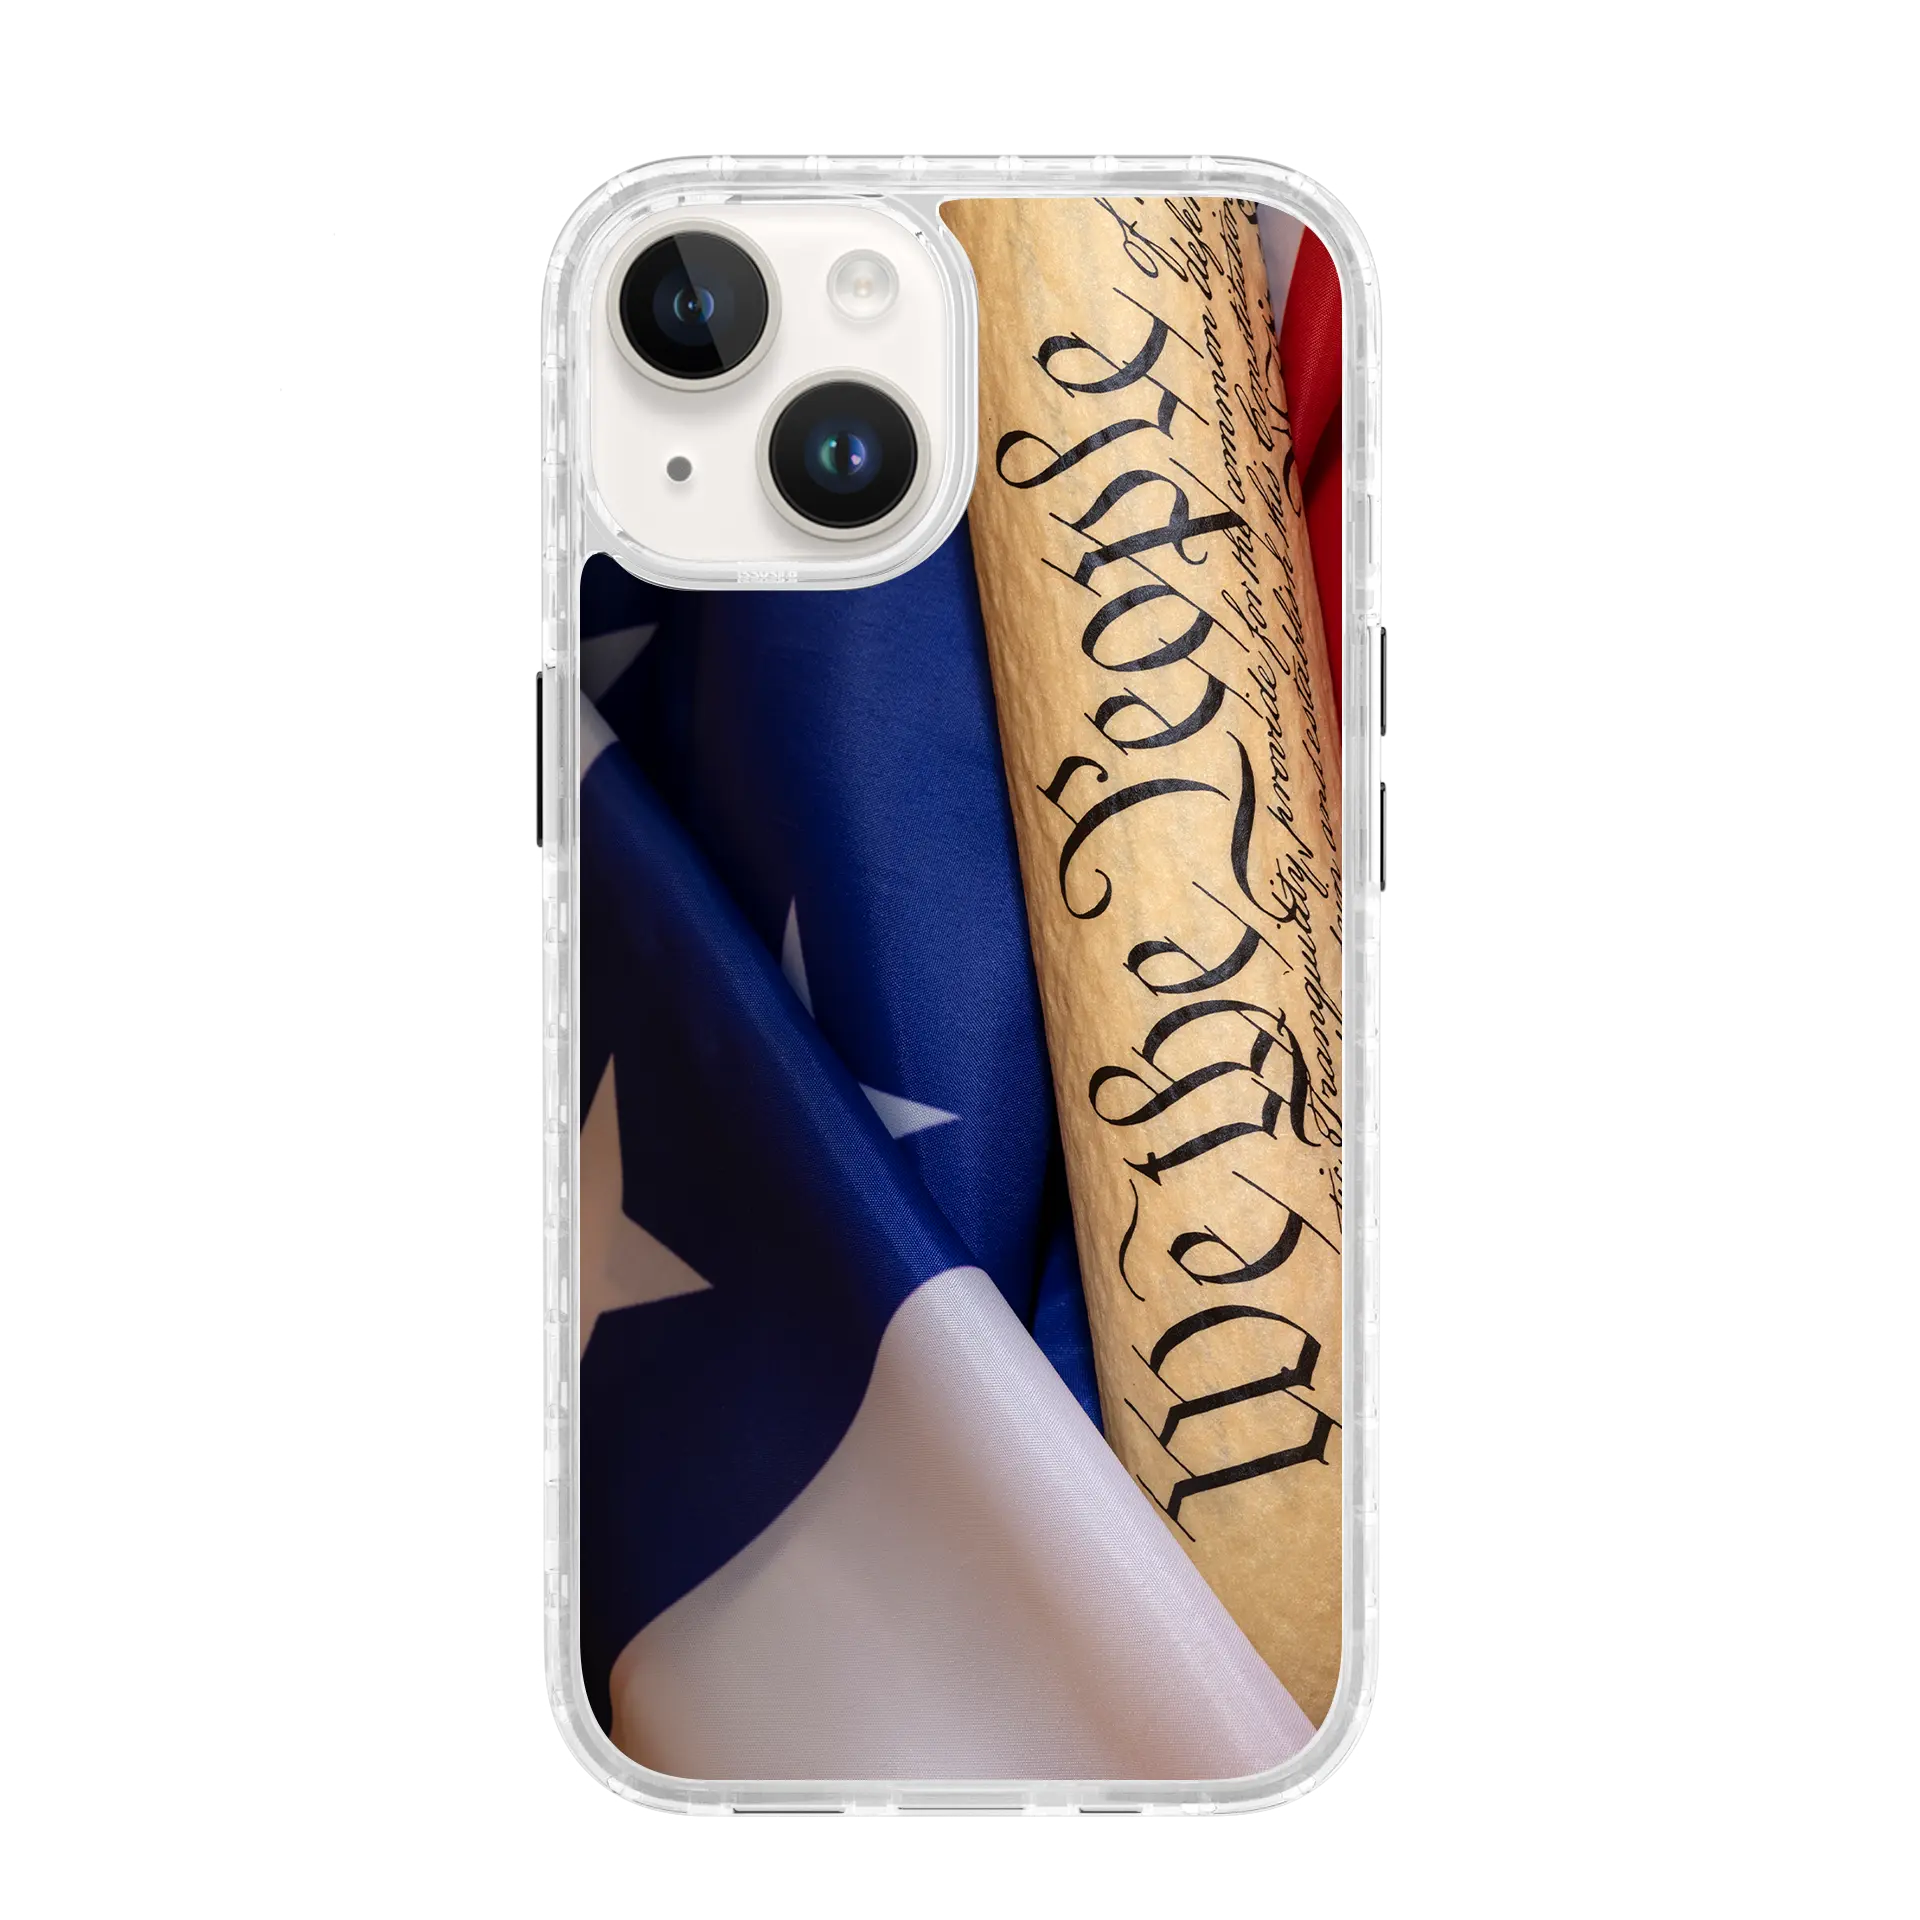 AppleiPhone14PlusCrystalClear United We Stand | We The People Series | Custom MagSafe Case Design for Apple iPhone 14 Series cellhelmet cellhelmet